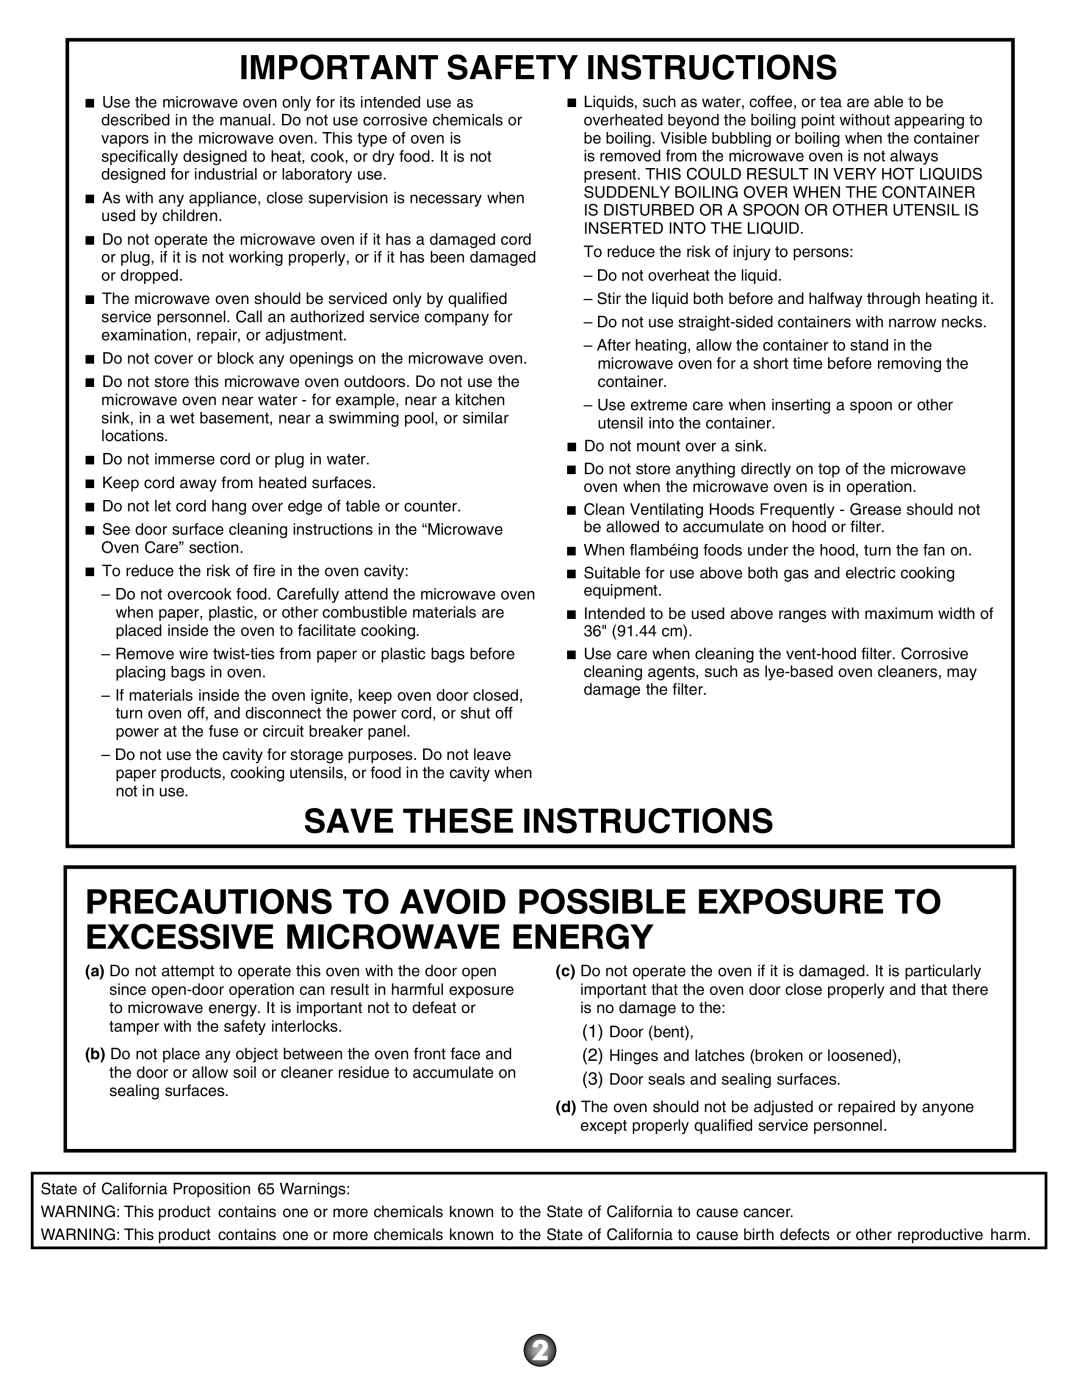 Amana AMV2175CB Precautions To Avoid Possible Exposure To Excessive Microwave Energy, Important Safety Instructions 